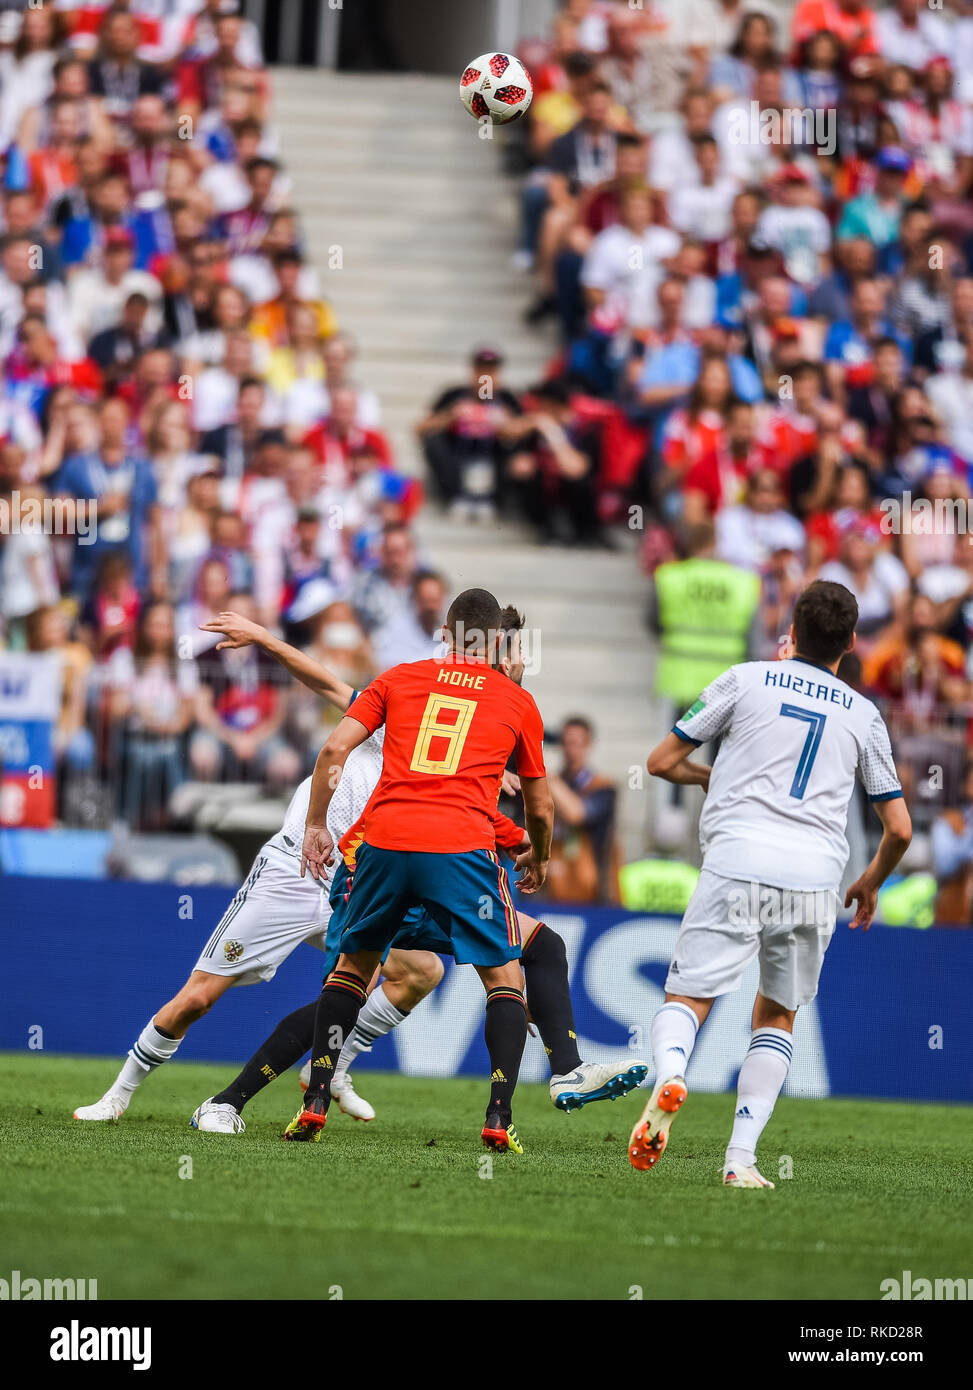 Moscow, Russia - July 1, 2018. Spain national football team players Gerard Pique and Koke against Russia players Daler Kuziaev and Alexander Golovin d Stock Photo